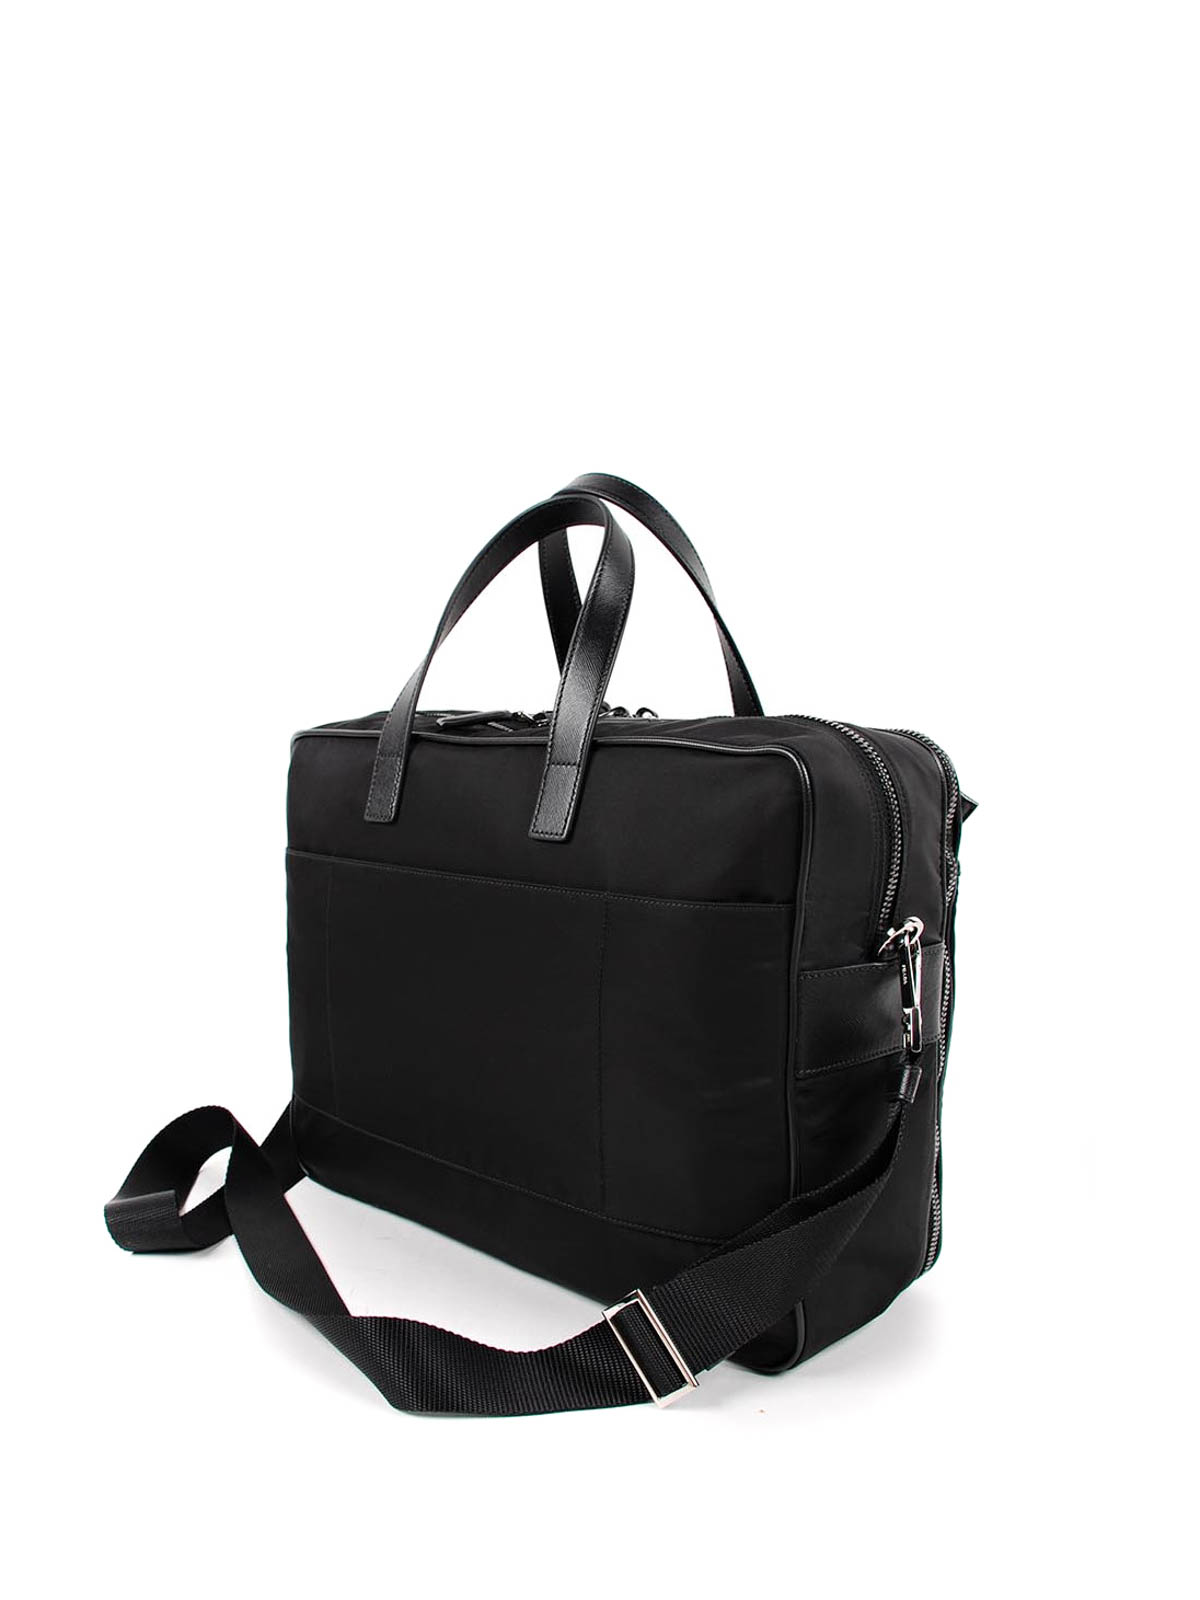 Laptop bags & briefcases Prada - Nylon and leather laptop bag - 2VE871064002